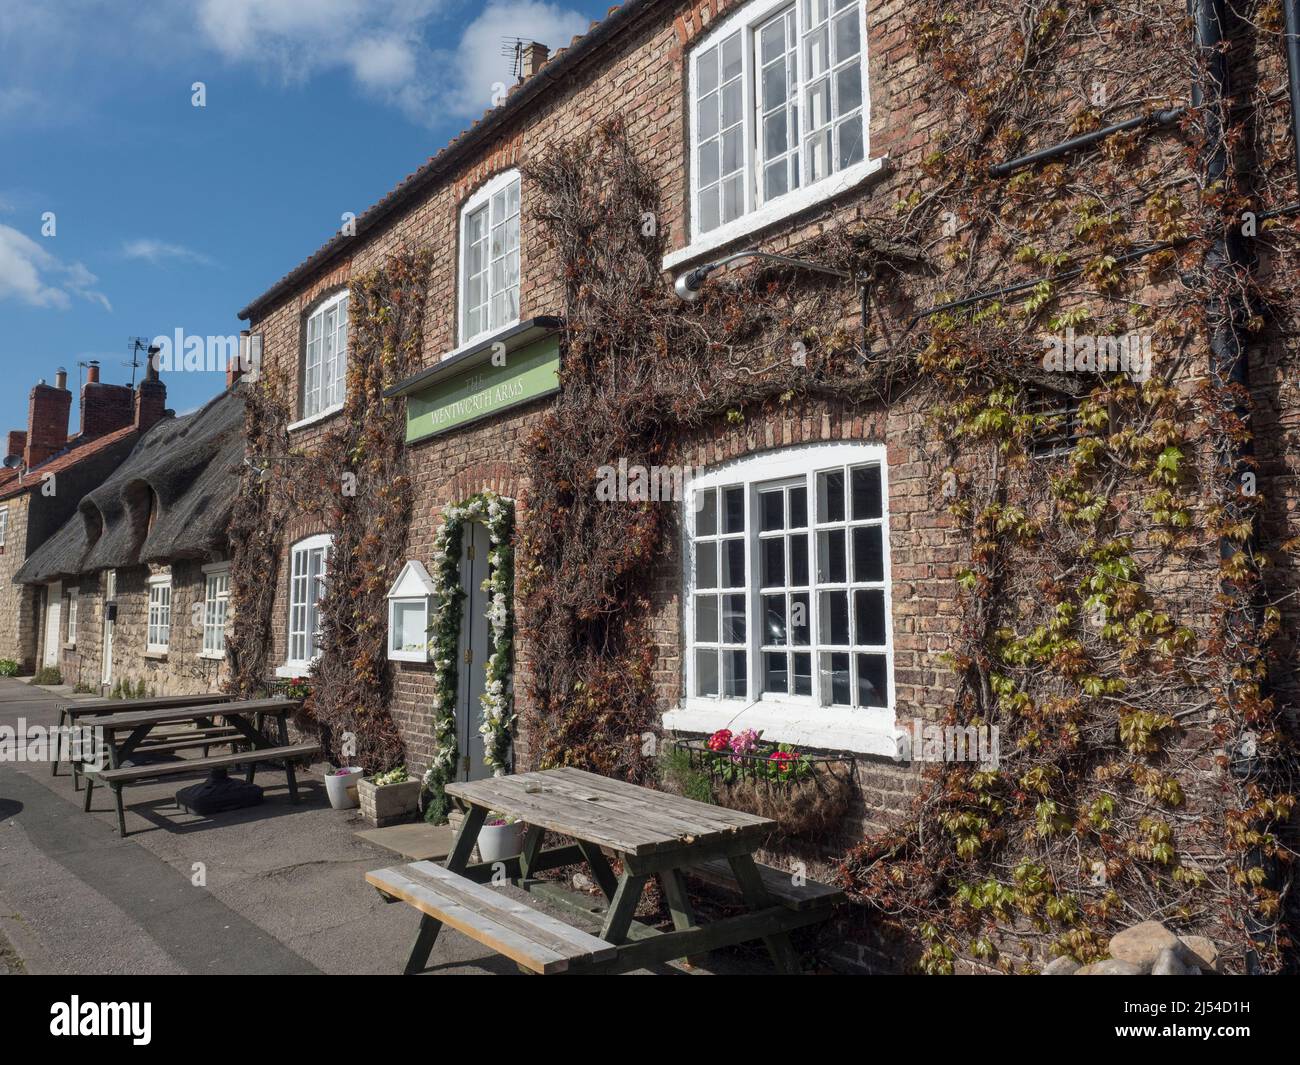 The Wentworth Arms Hotel and Thatch Cottage listed buildings in Old Malton near Malton North Yorkshire England Stock Photo